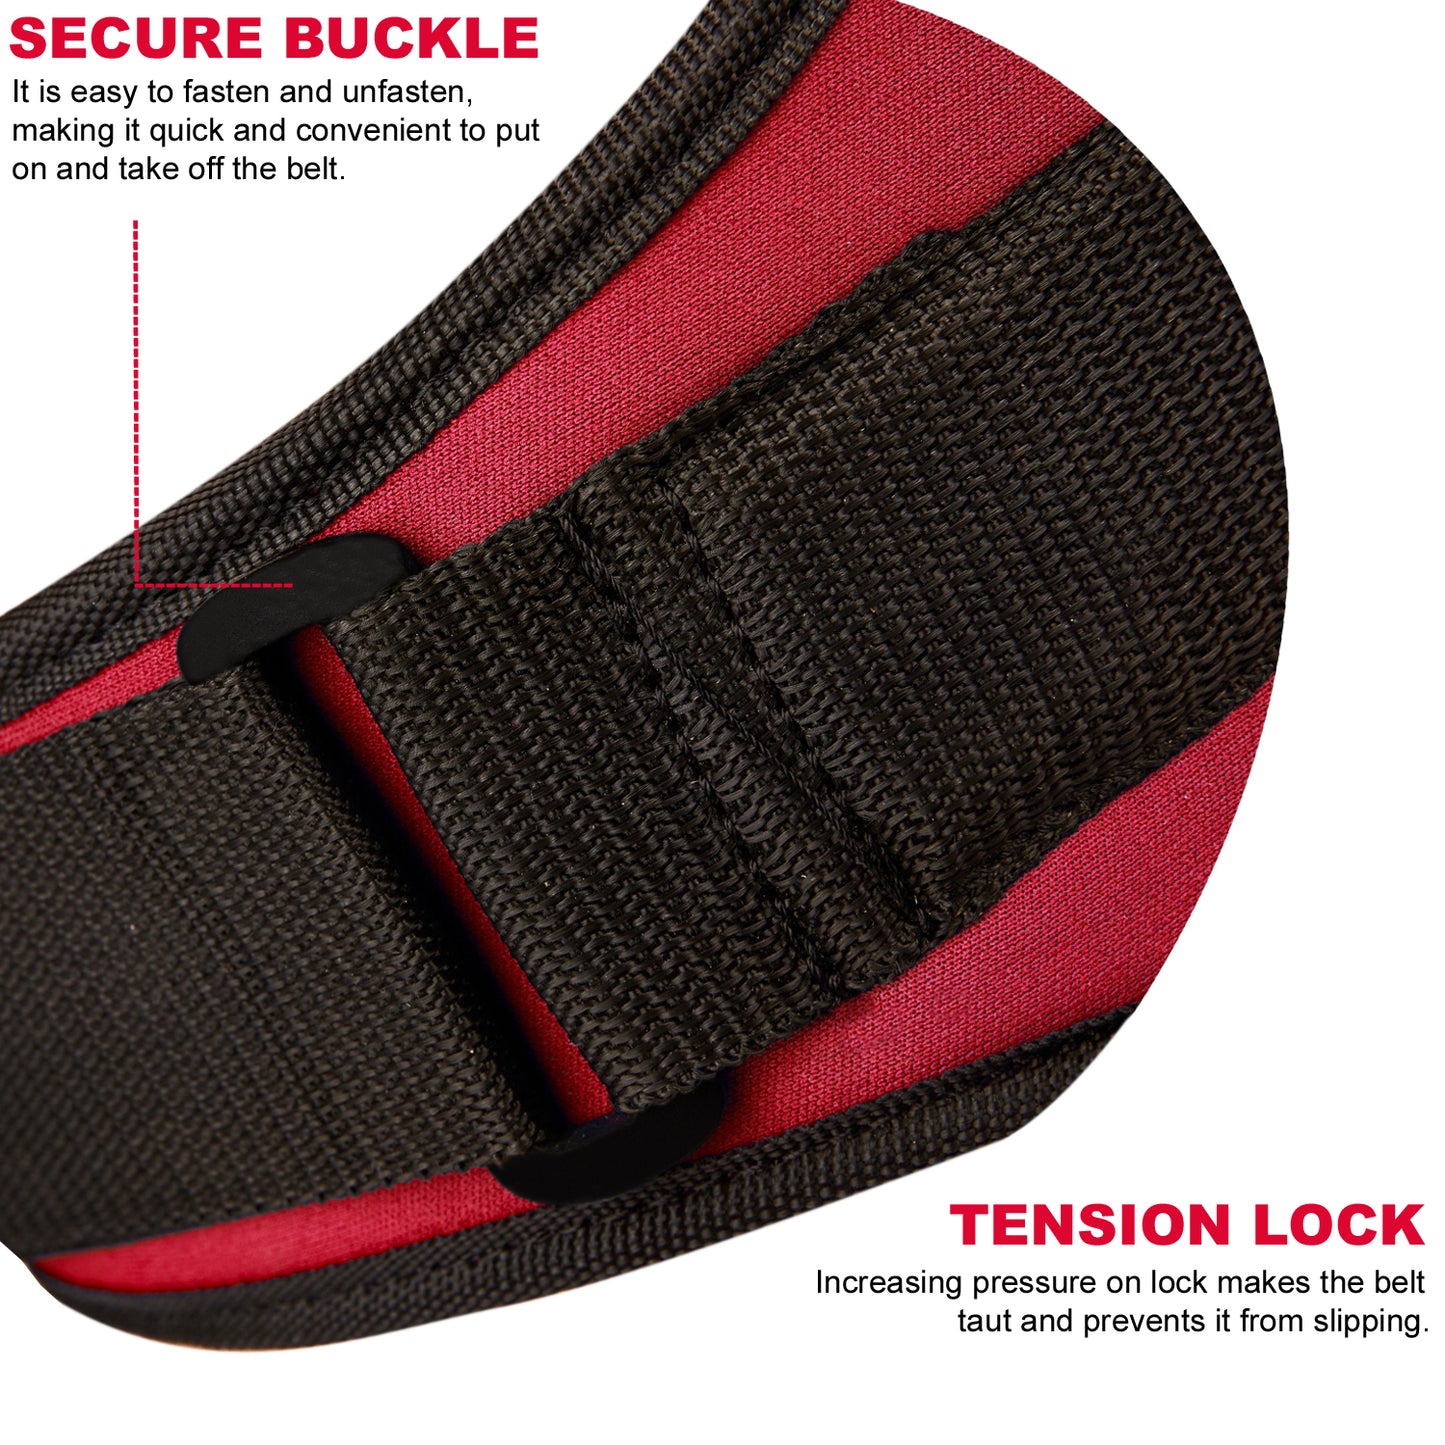 Secure Buckle 